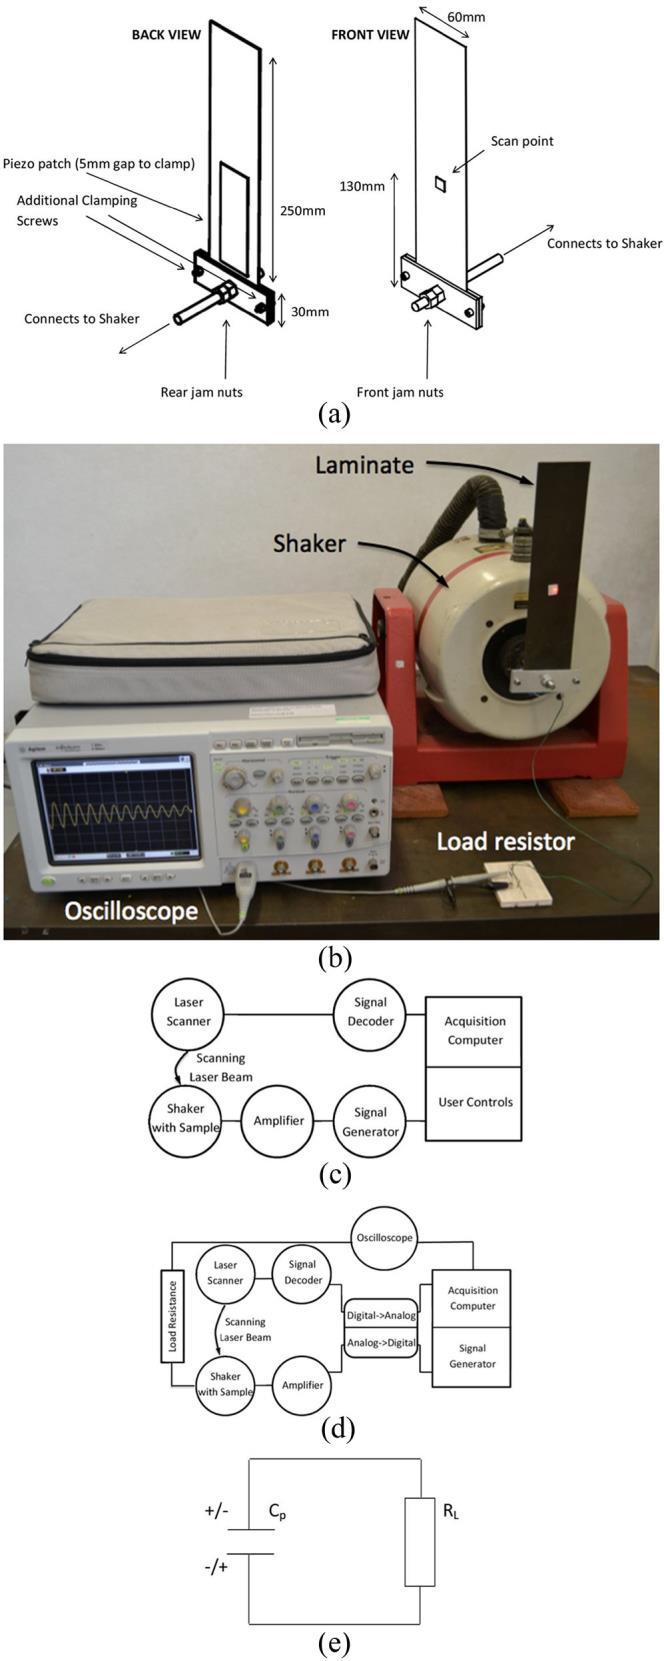 Manufacture and Characterisation of Piezoelectric Broadband Energy Harvesters 11